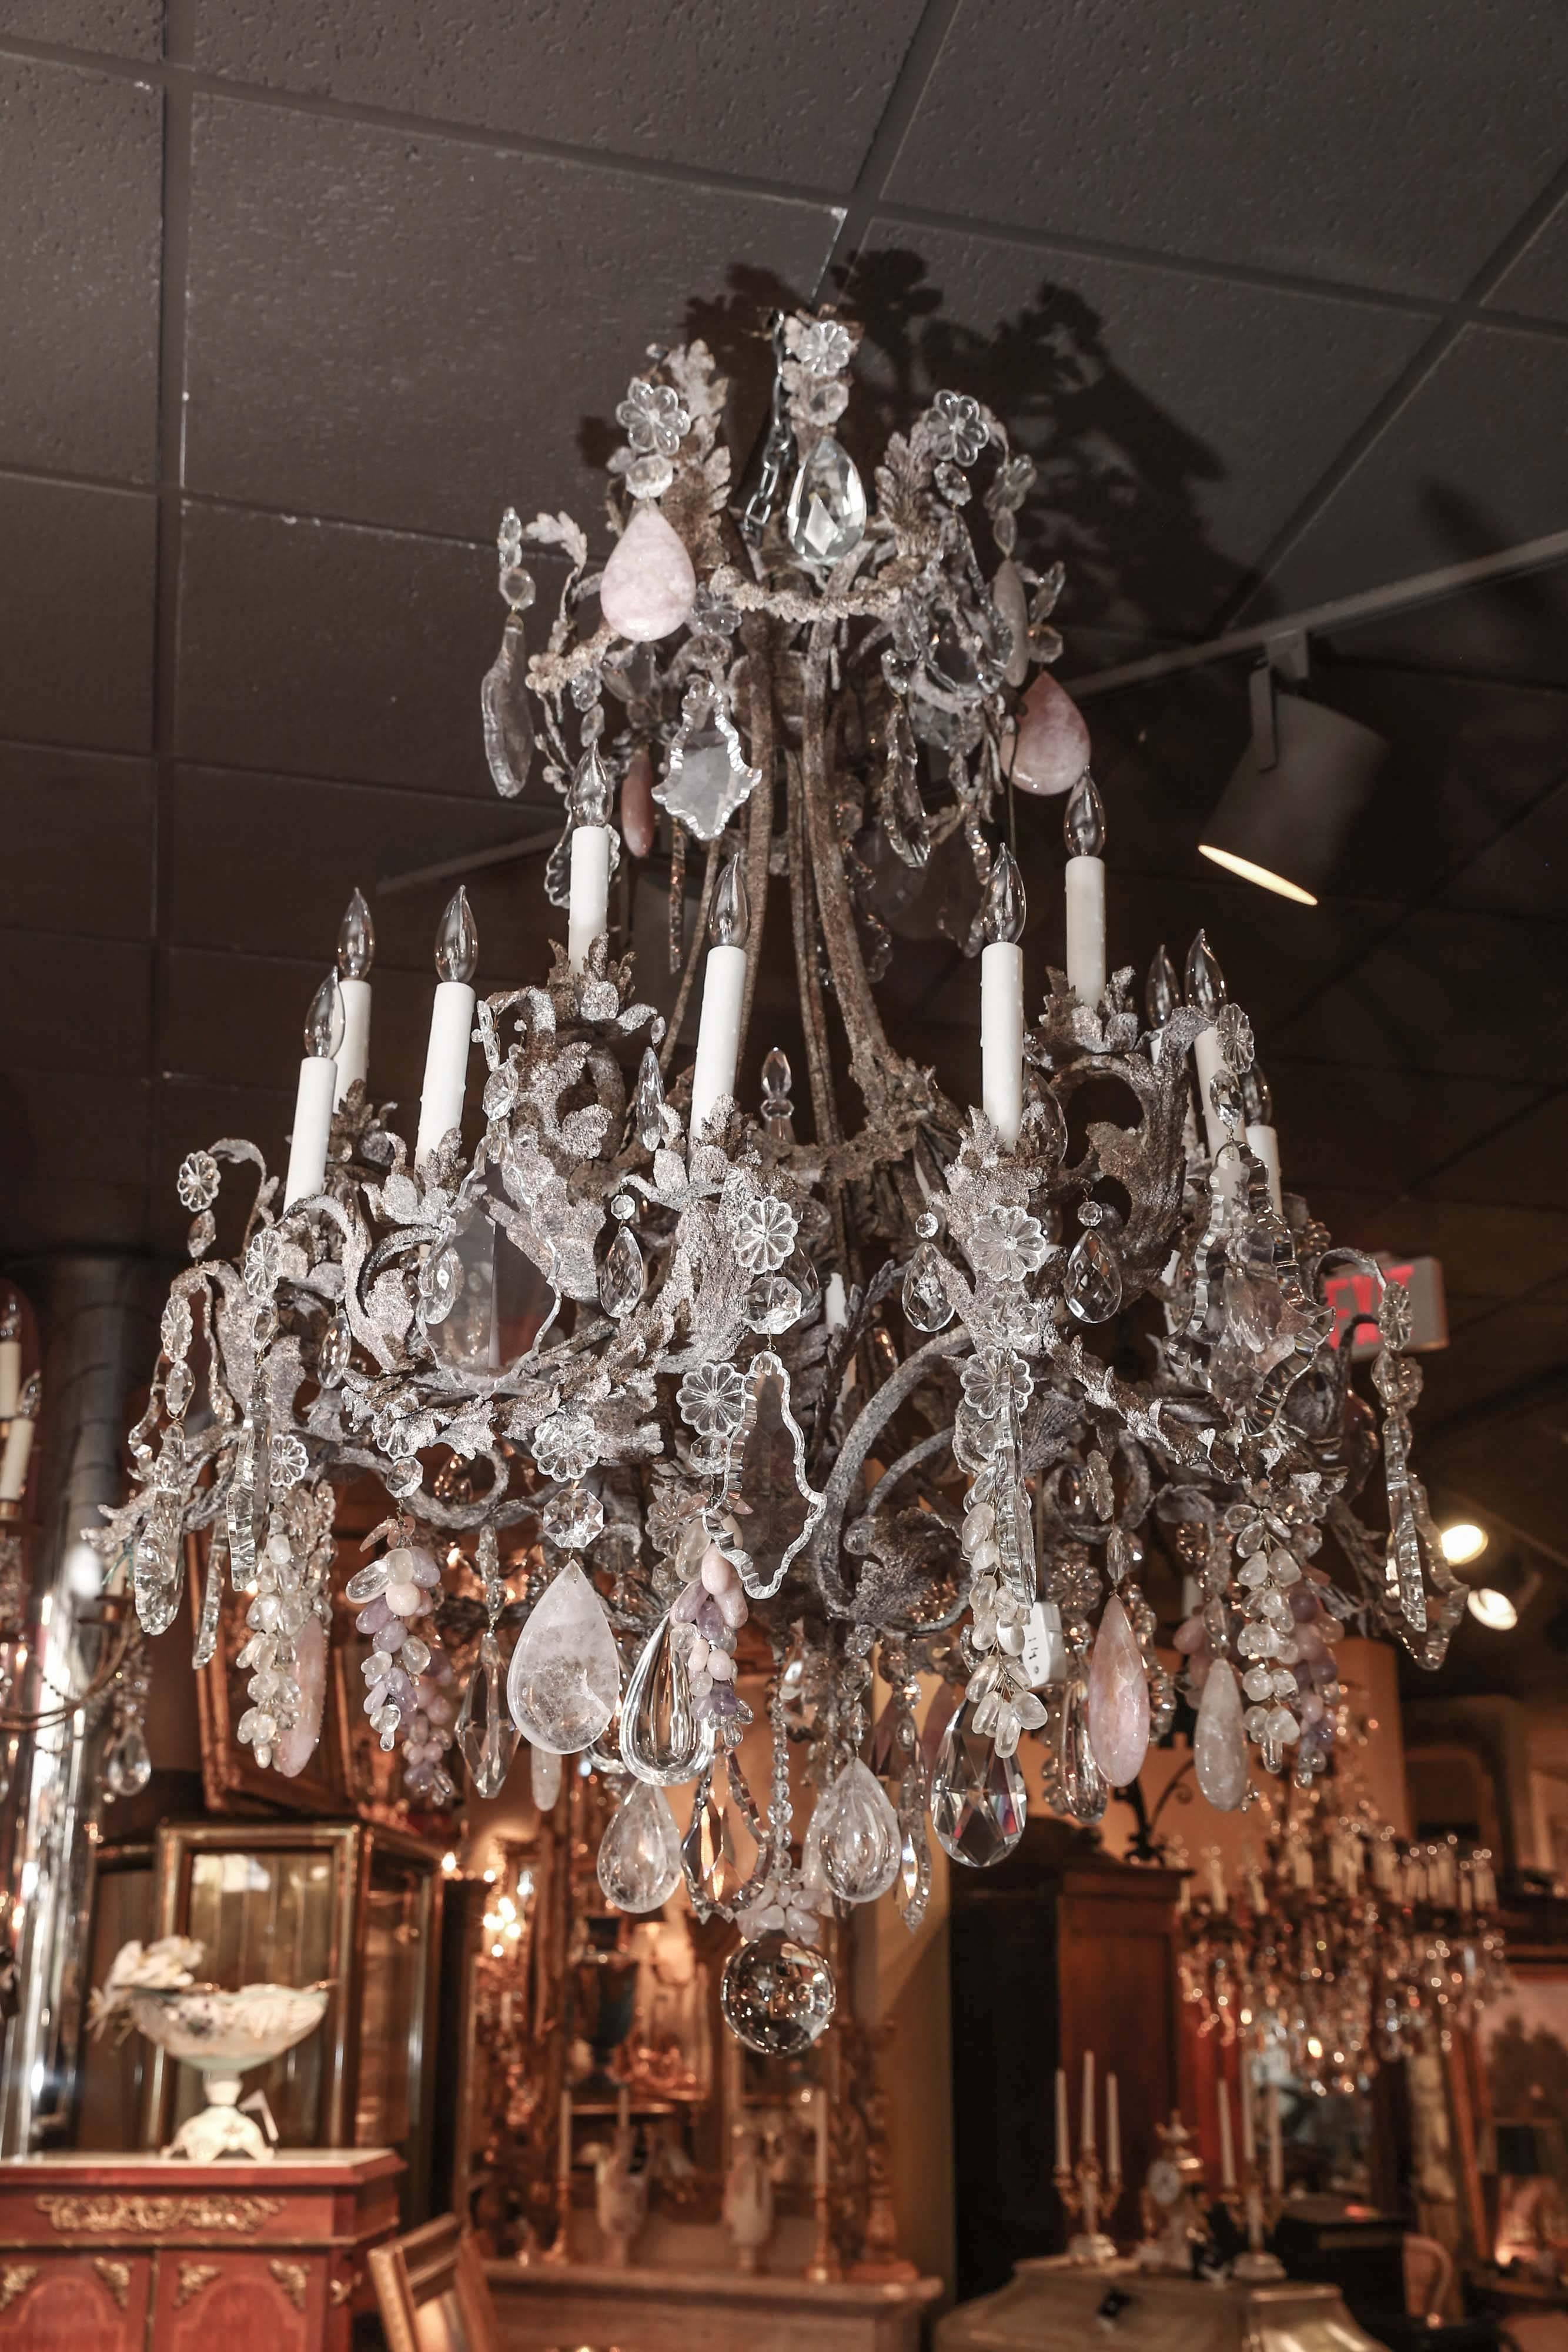 This large piece has scrolling arms made of iron with an antique textured finish
it has clear crystal and rock crystal intermingled with rose quartz and amythest
Pieces. It has sixteen lights and it is in great working order.